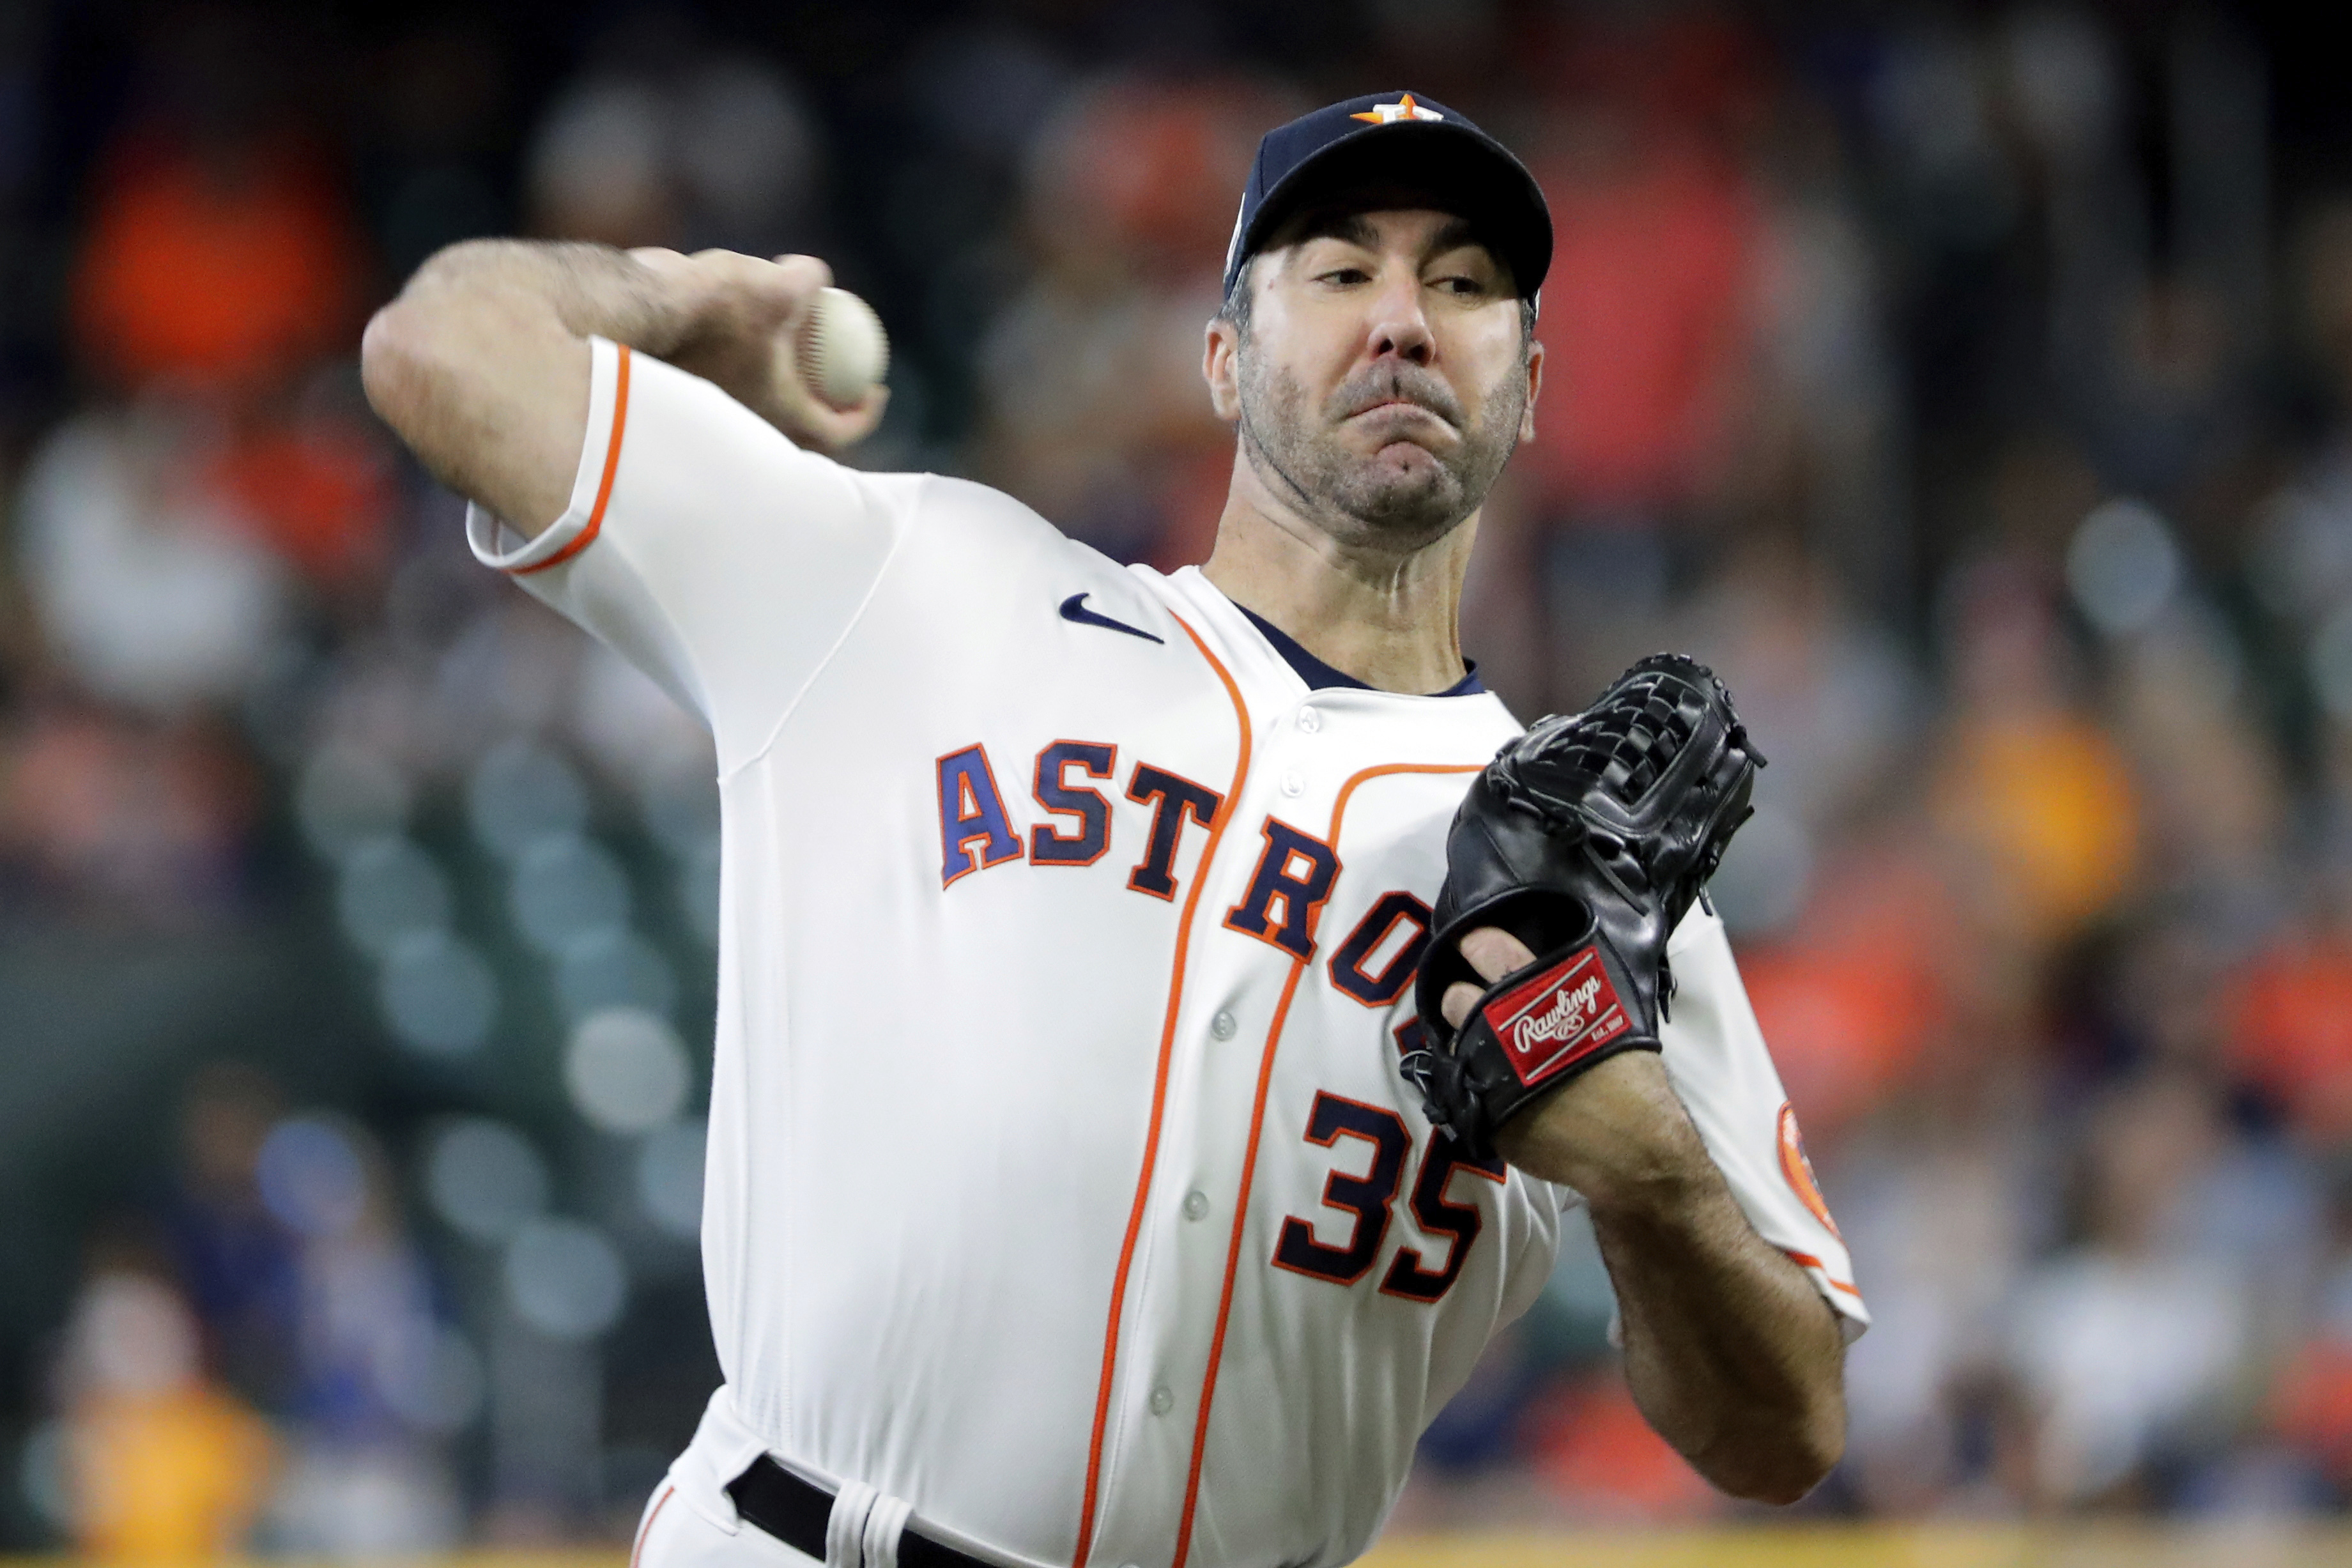 Verlander pitches Astros to 3-1 win, ends Yanks' home streak